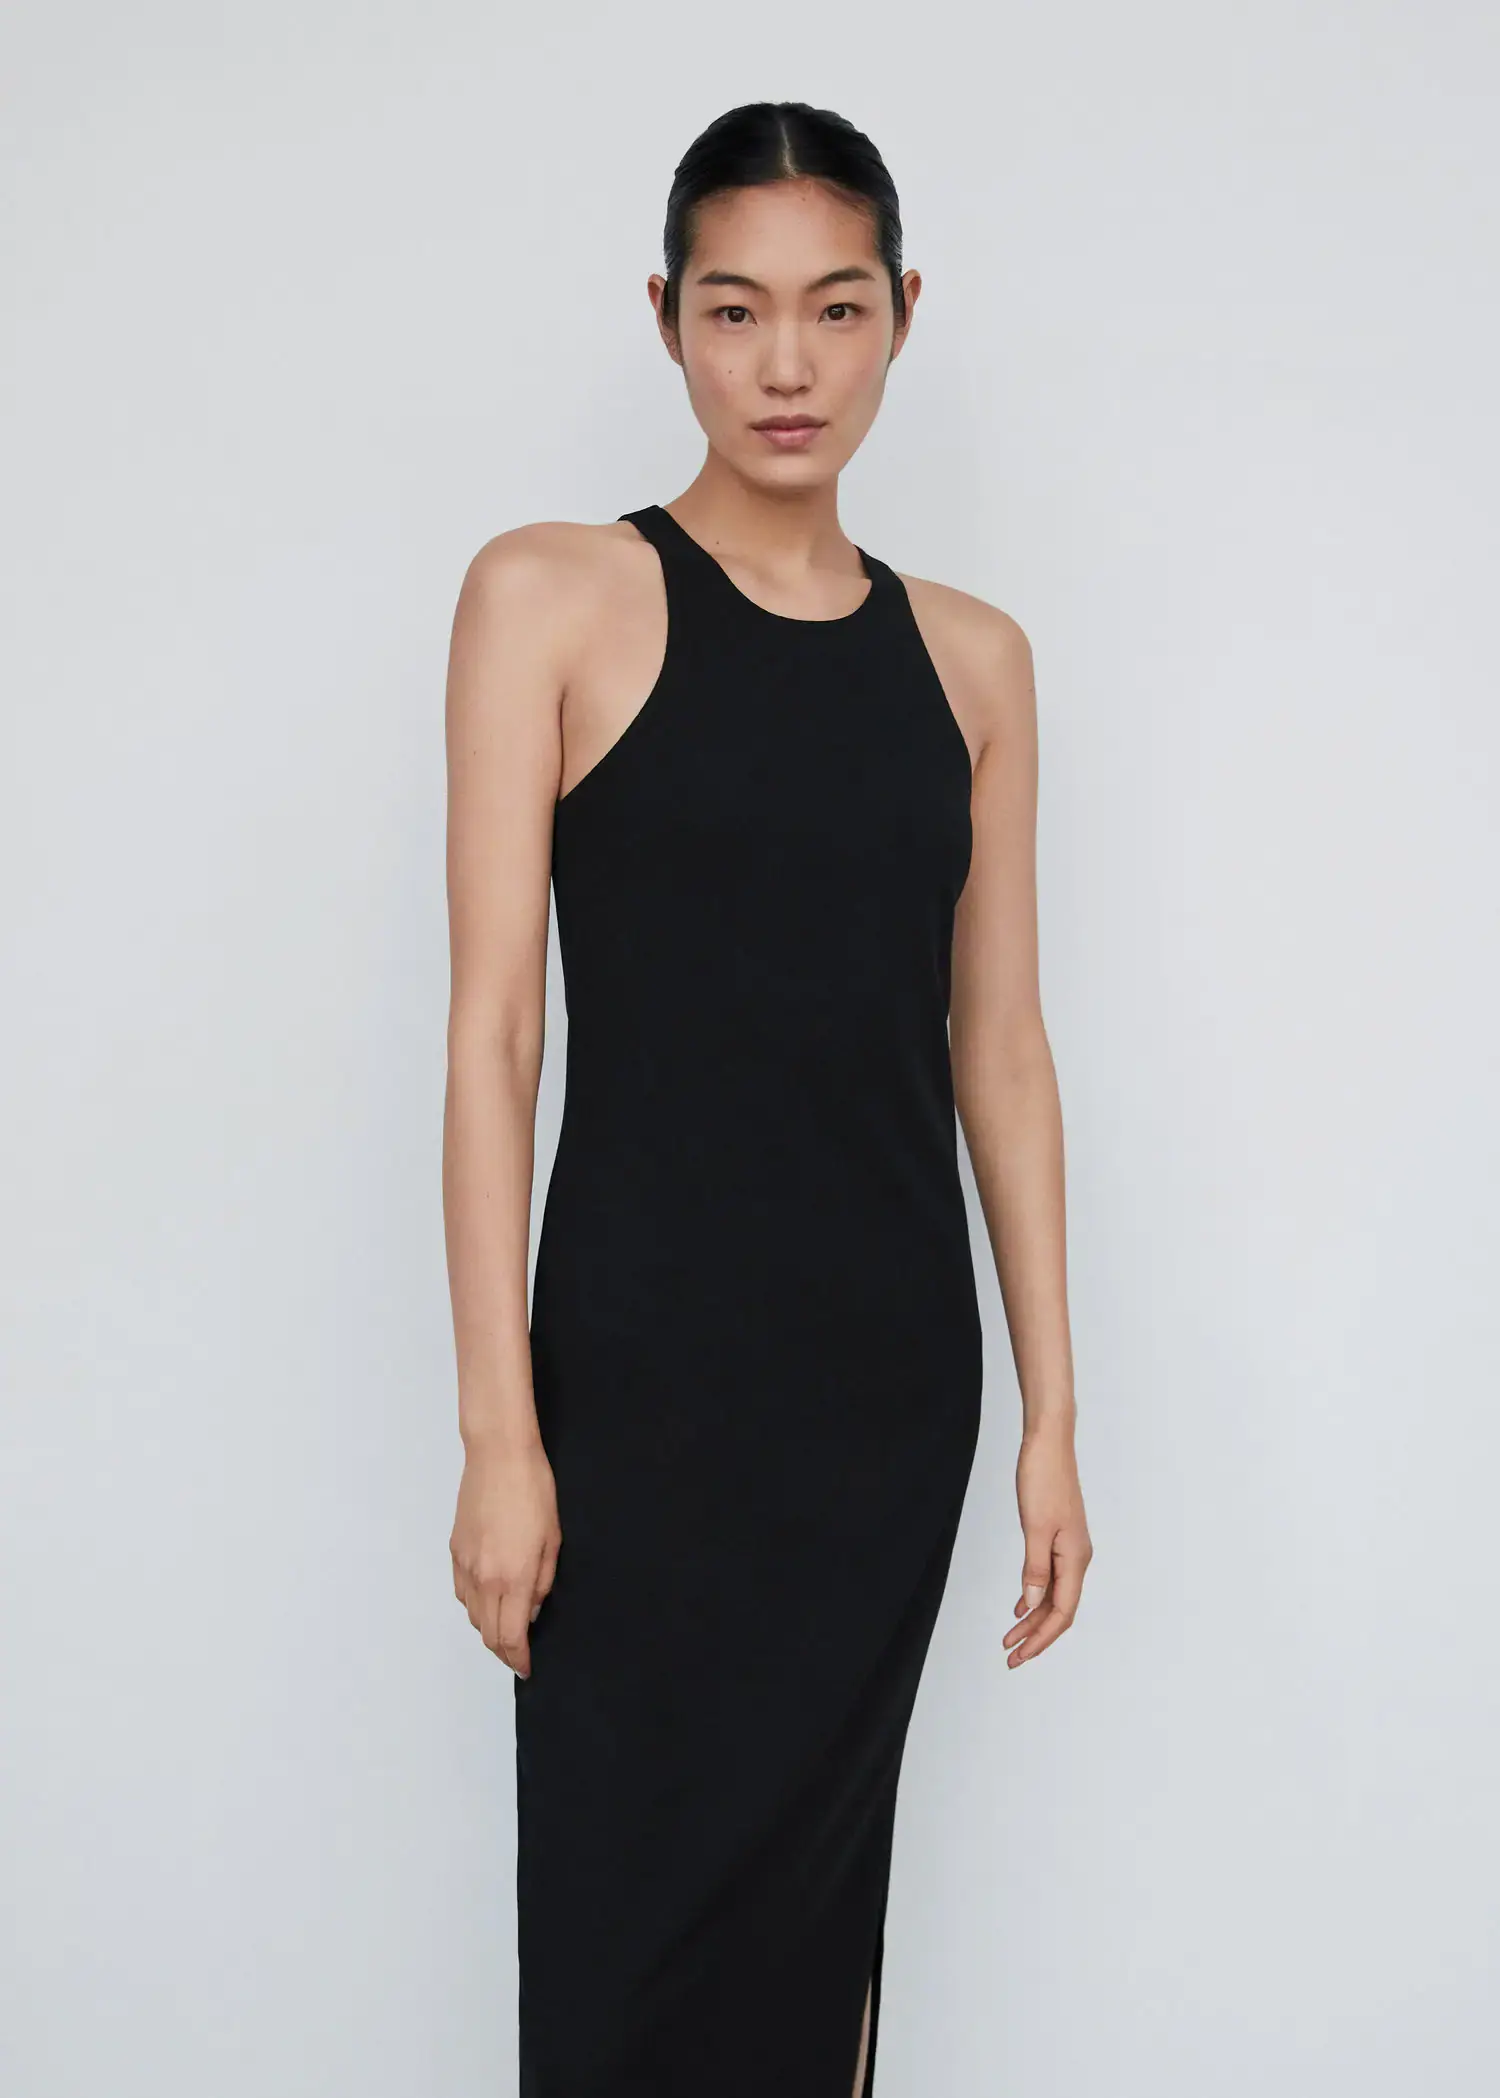 Mango Midi-dress with slit. a woman wearing a black dress standing in front of a white wall. 